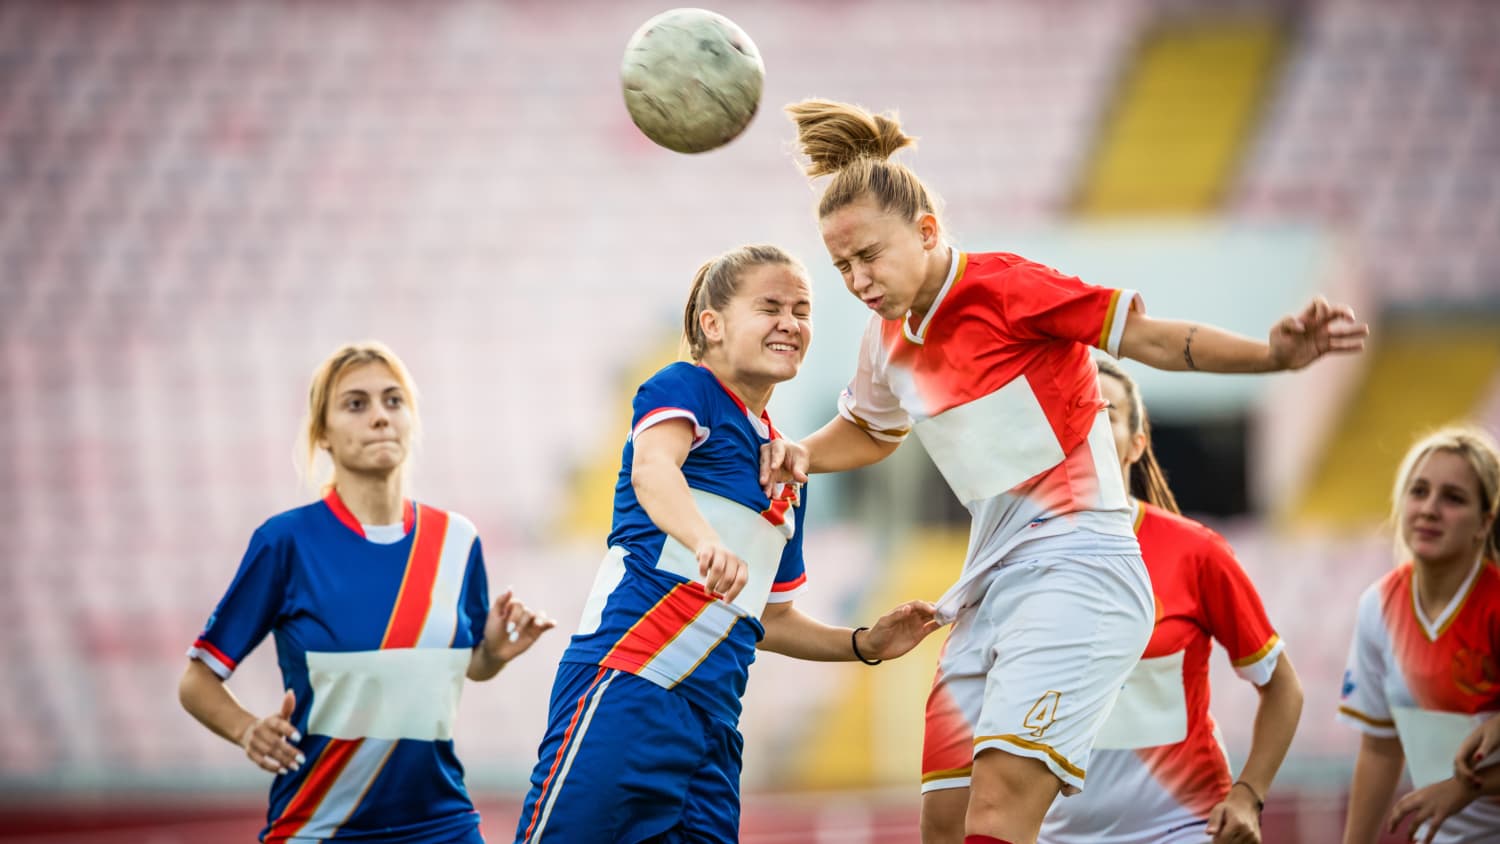 Two female soccer rivals heading the ball on a match, possibly at risk for concussion